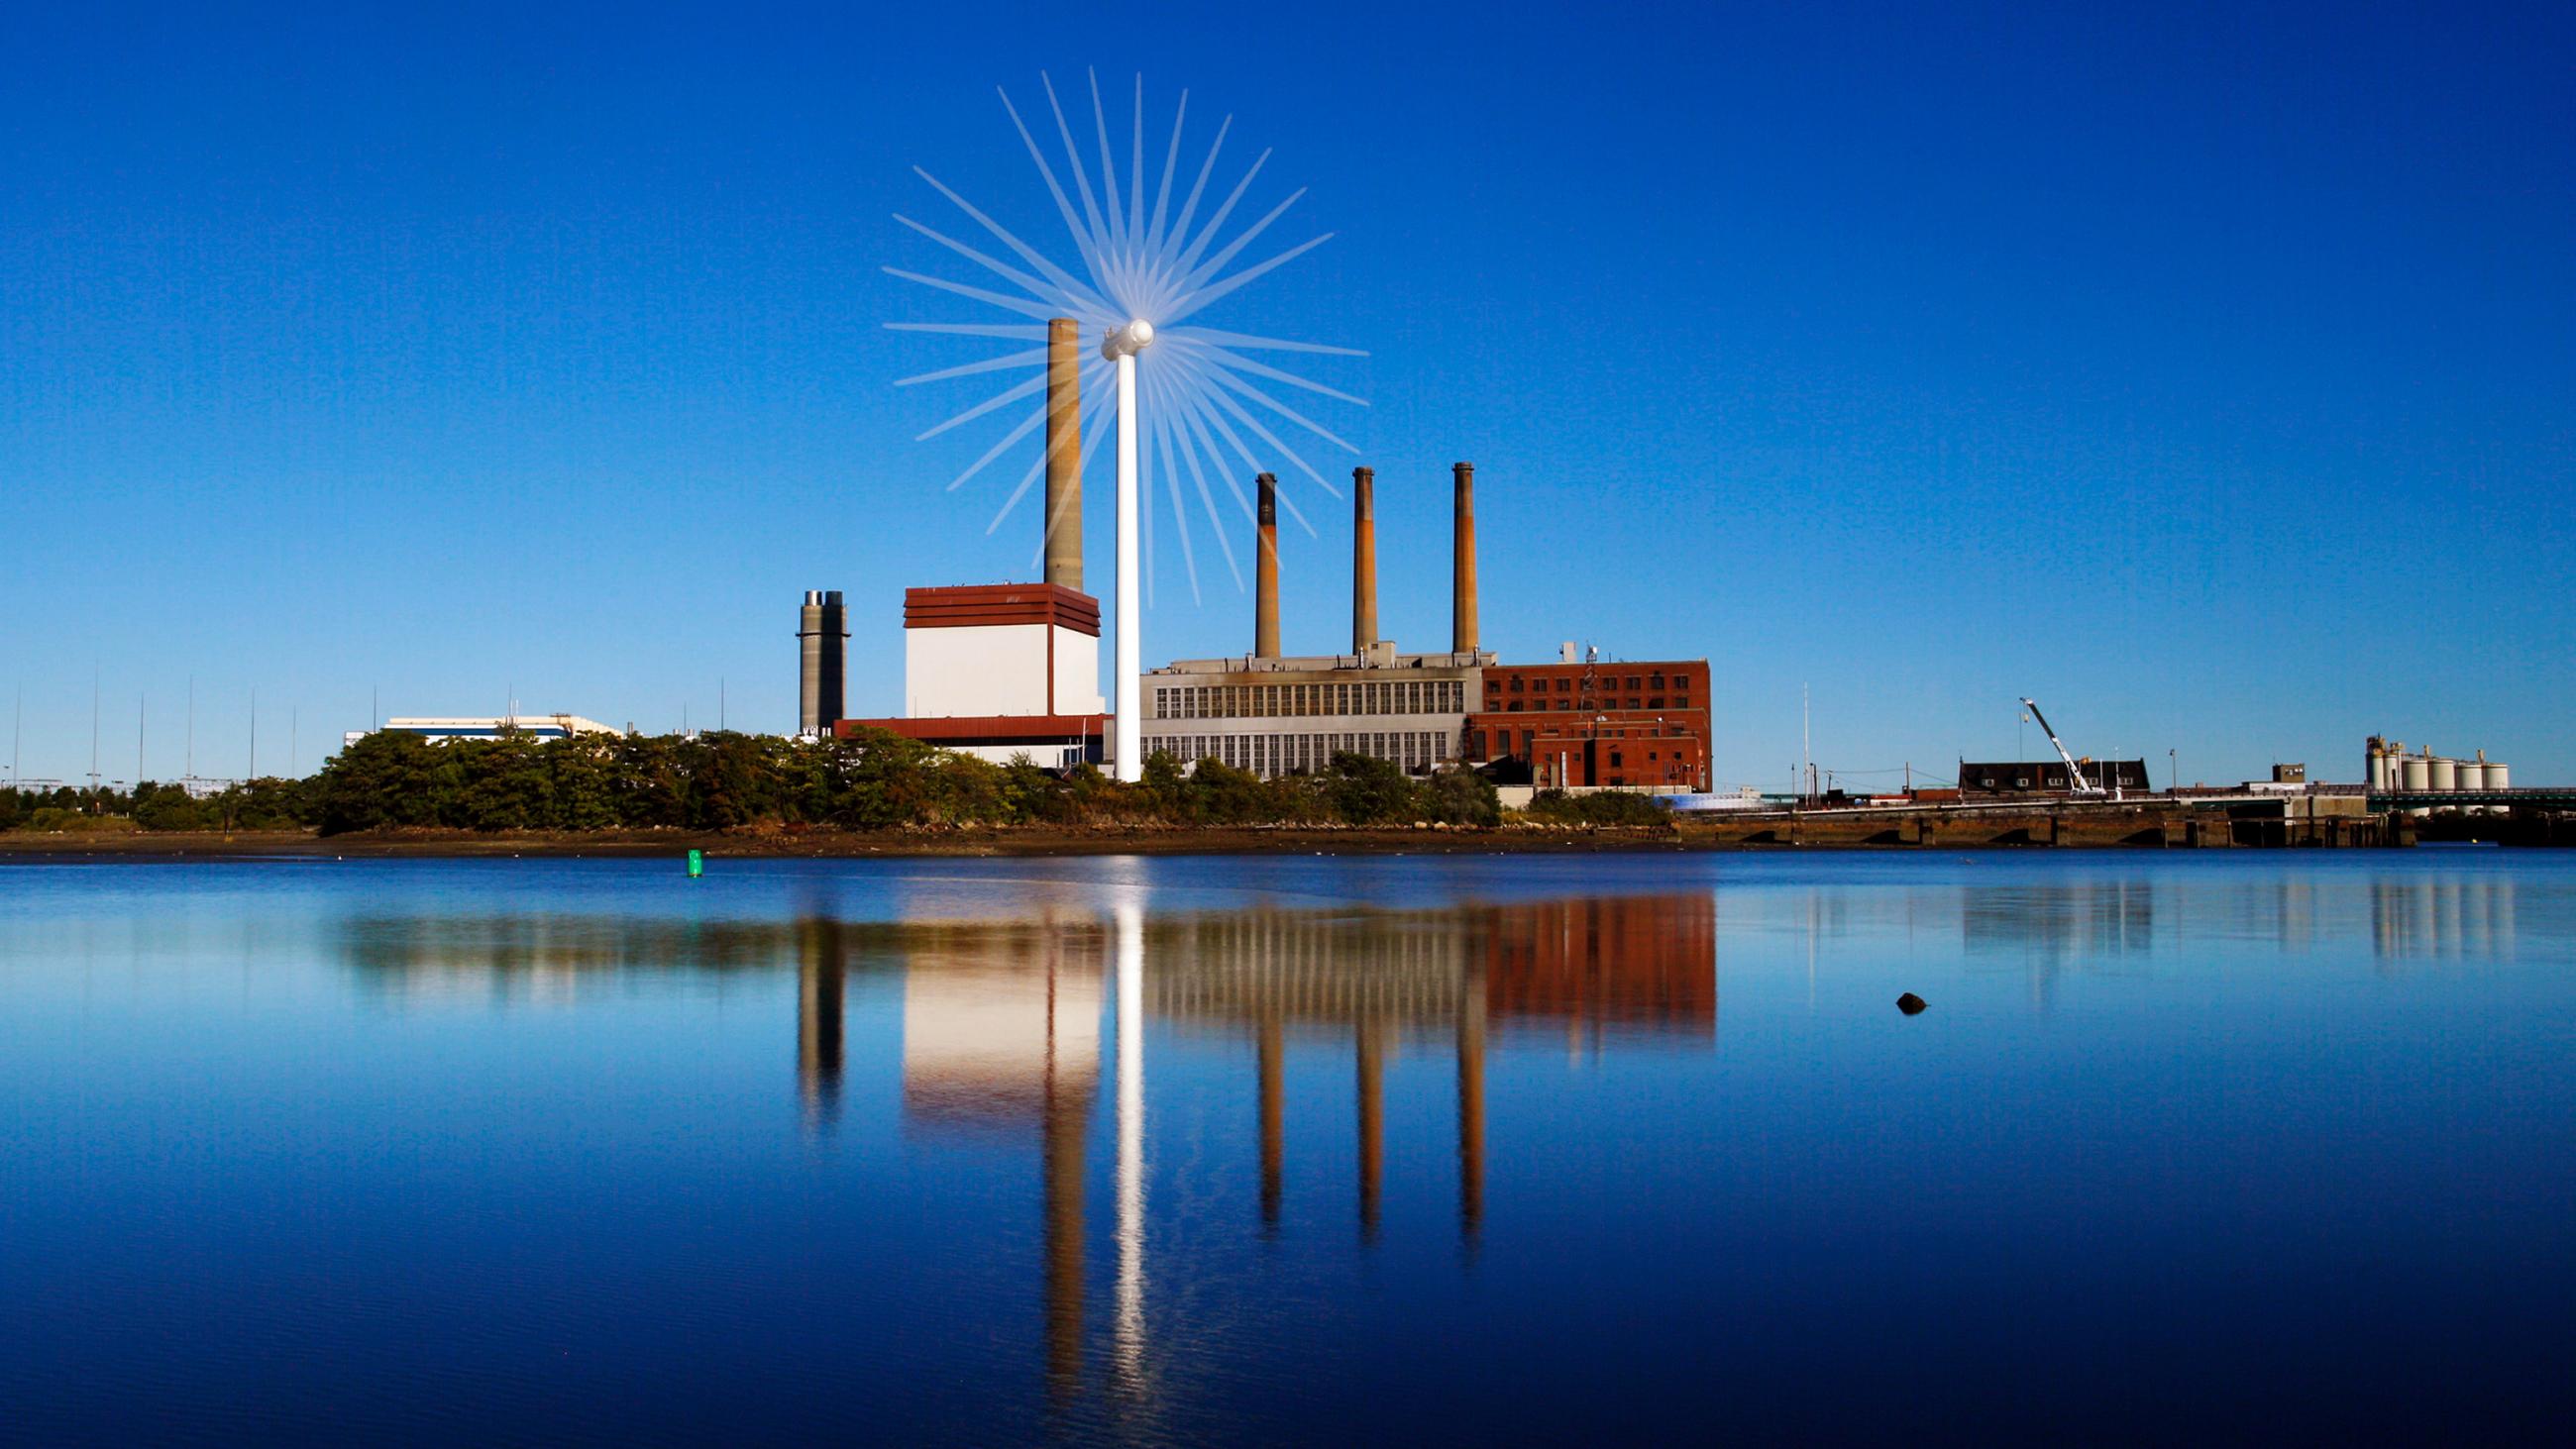 The photo shows a multiple exposure photograph of a wind power plant with the multiple exposures creating the effect of showing the wind turbine blades in different orientations. 